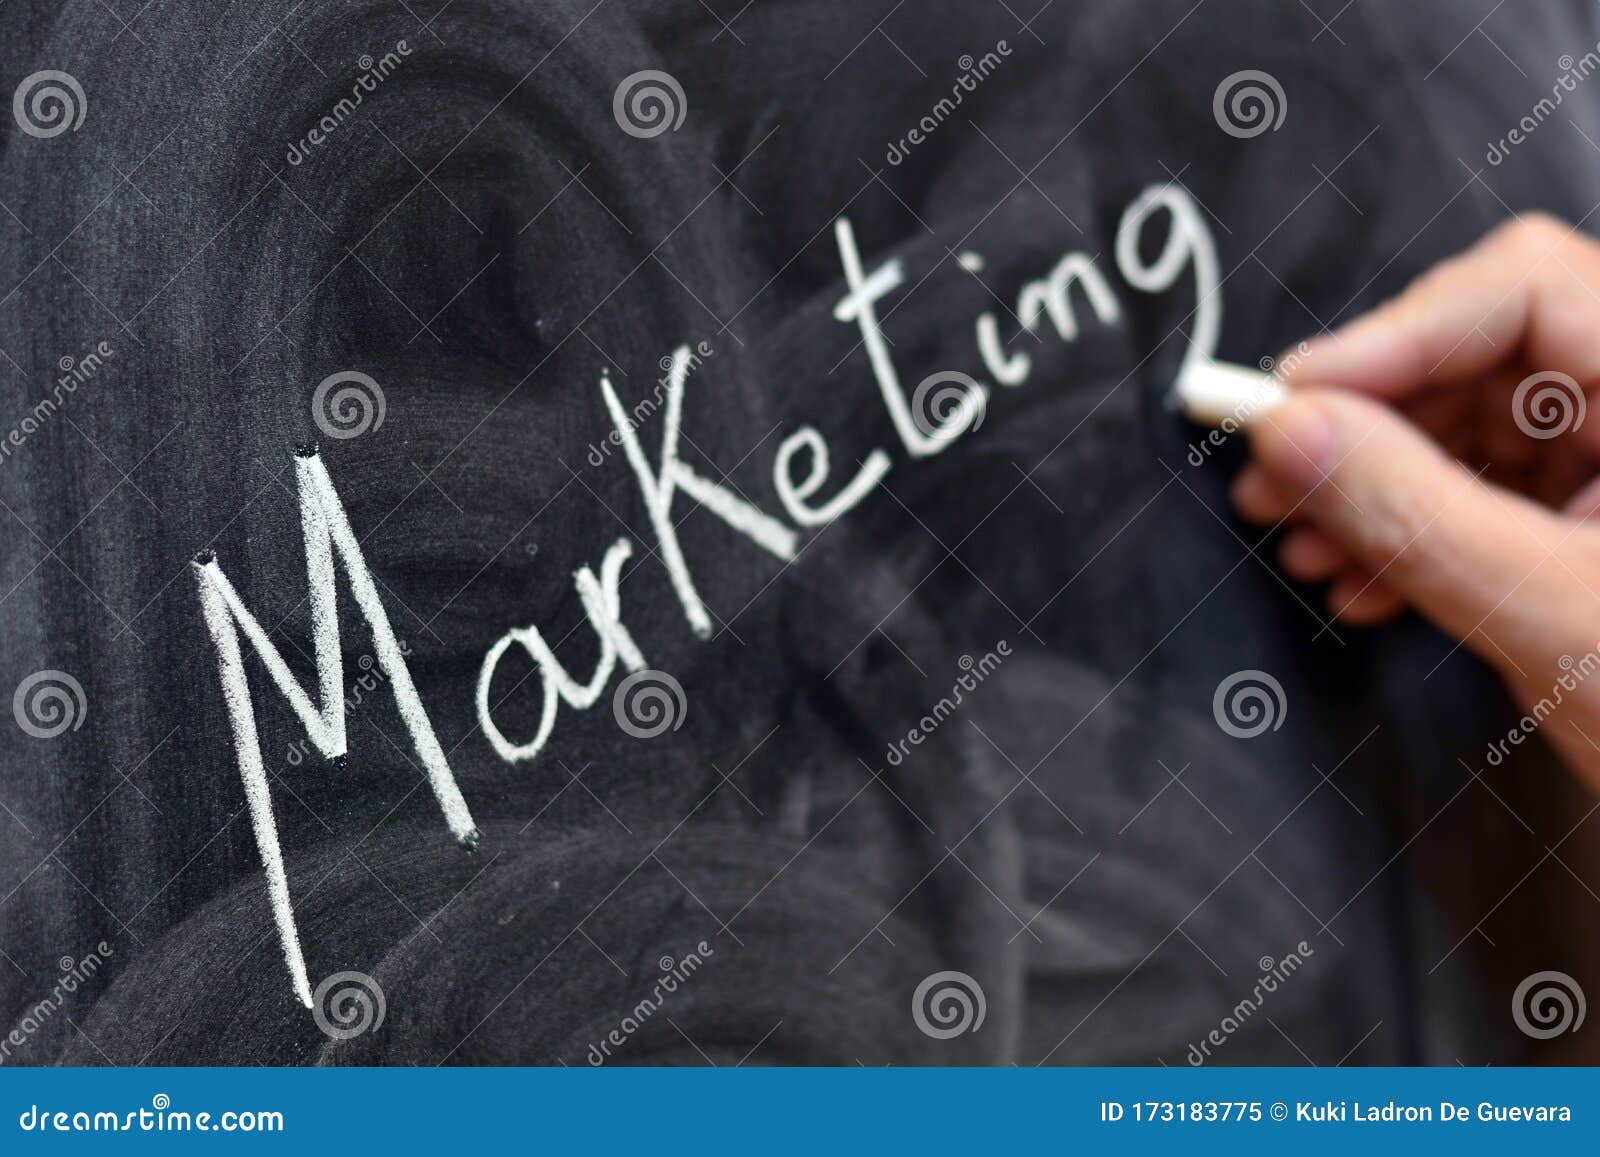 the word marketing written with a chalk on the blackboard